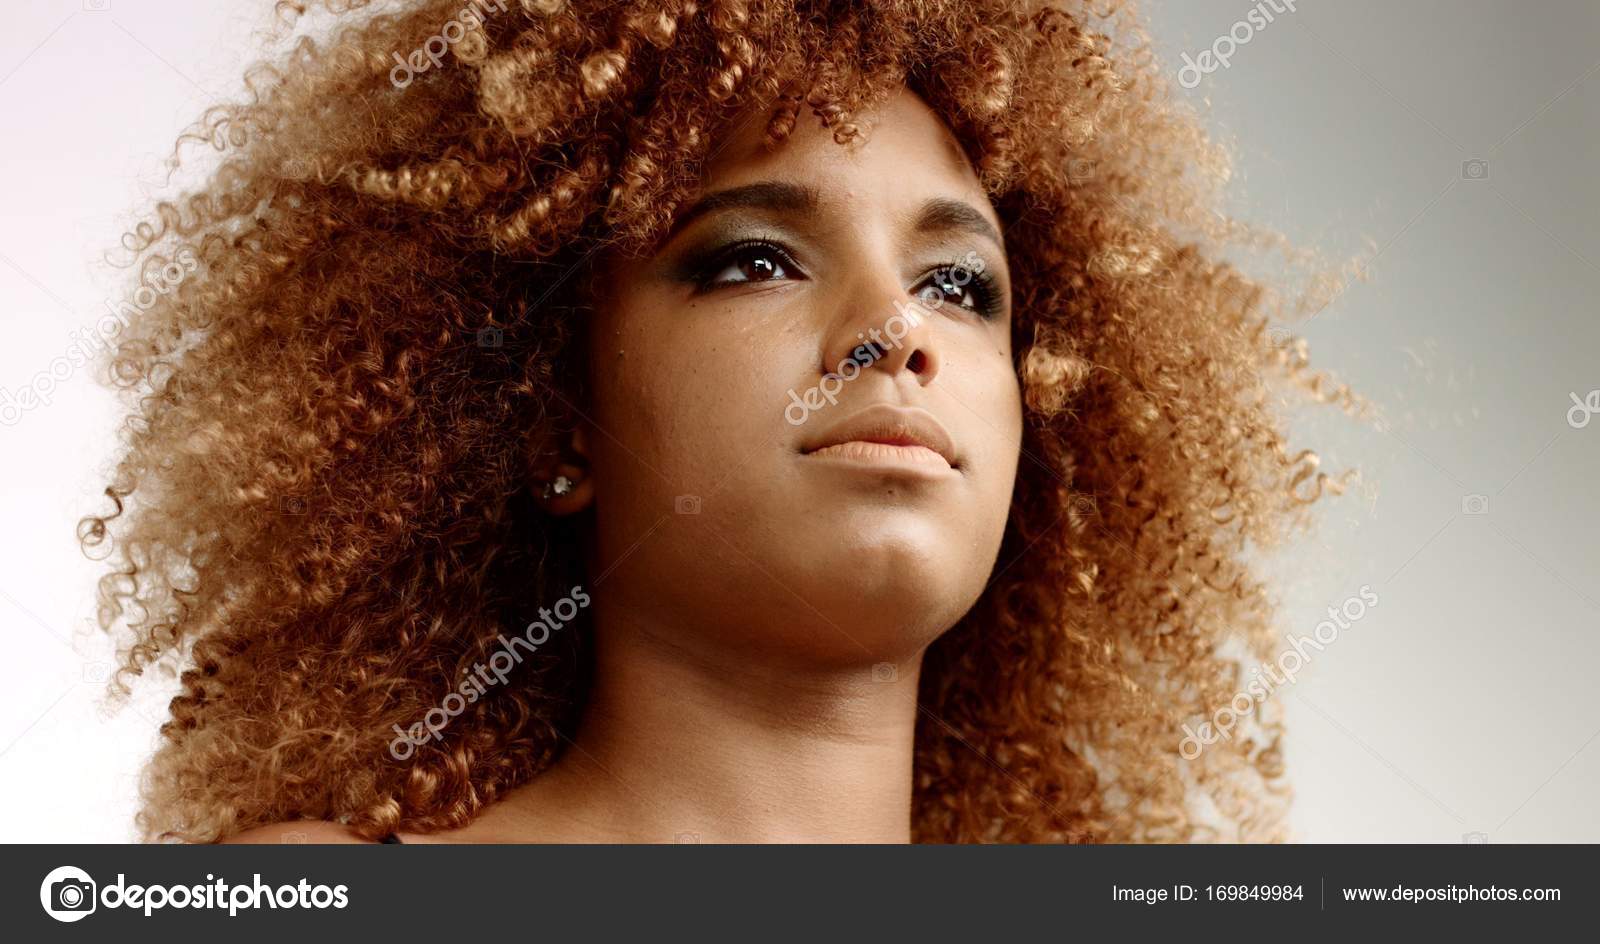 Black Girl With Blonde Curly Hair Mixed Race Black Woman With